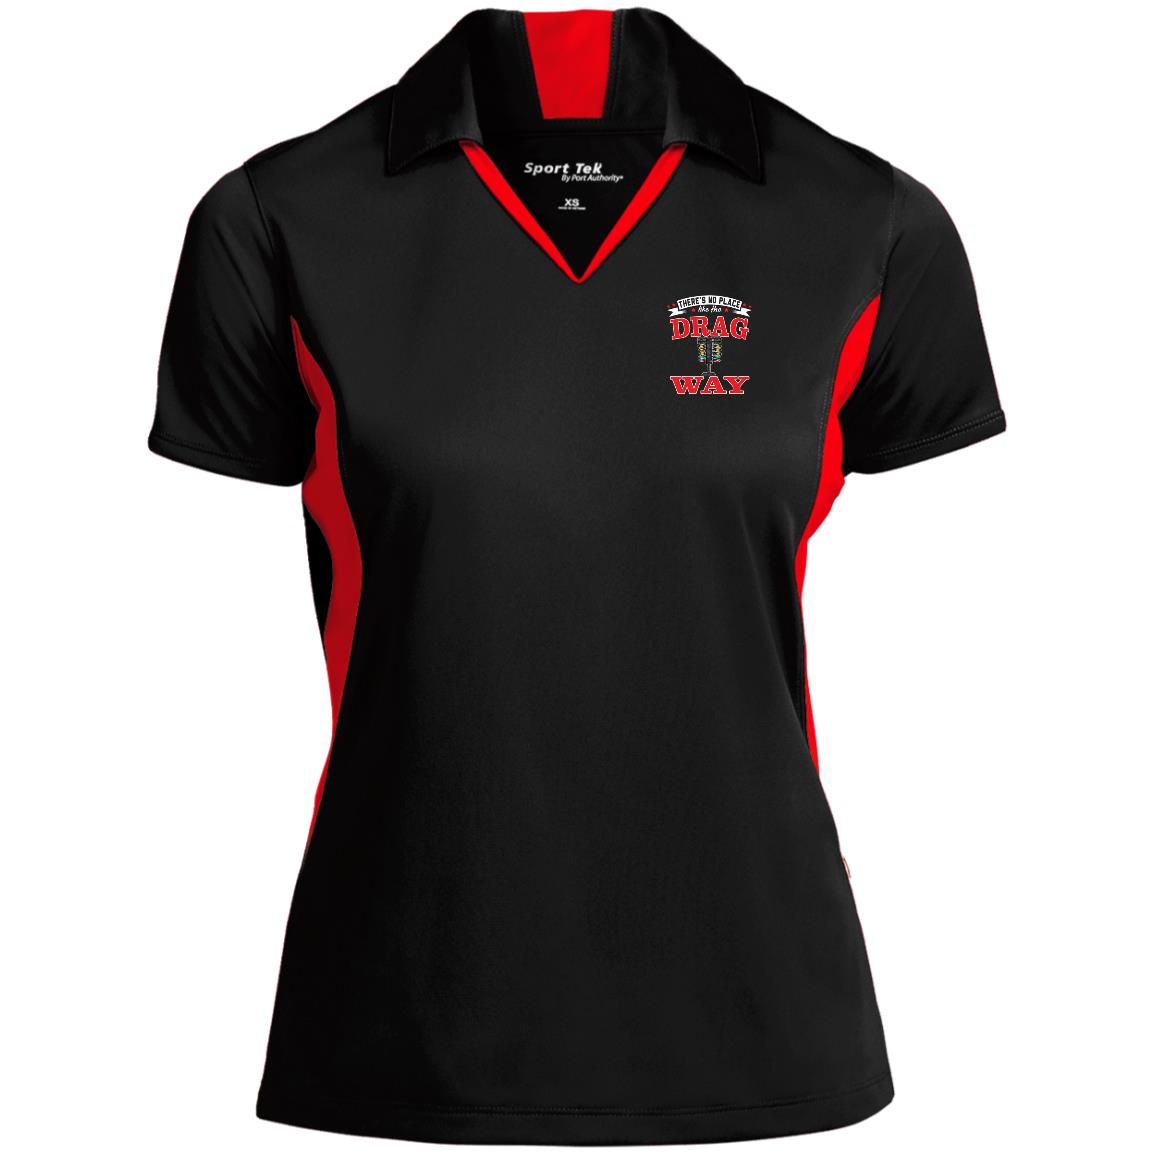 There's No Place Like The Dragway Ladies' Colorblock Performance Polo